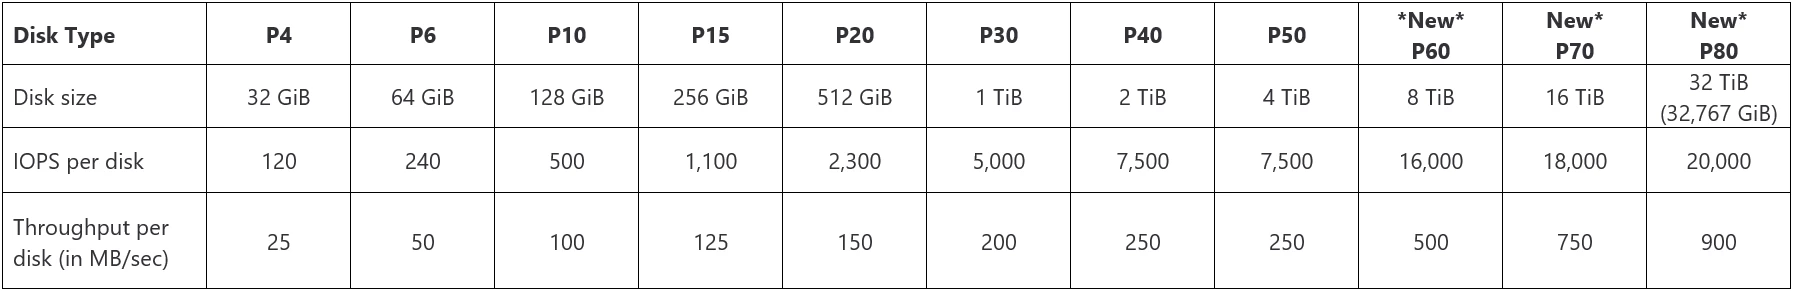 Table displaying Premium SSD disks type, size, IOPS per disk, and throughput per disk.